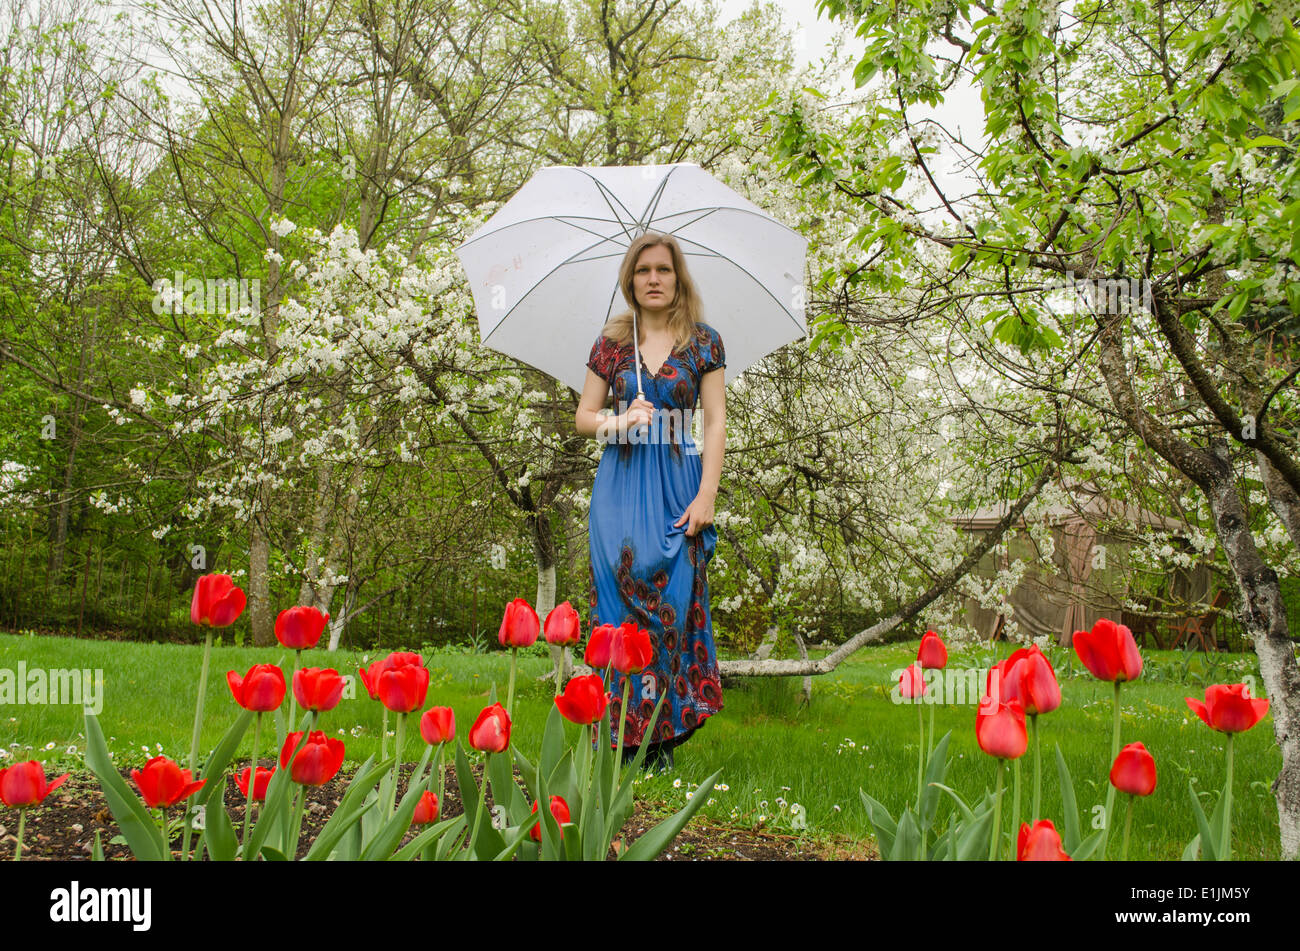 beautiful blonde girl with blue dress posing in park flower tree with umbrella Stock Photo